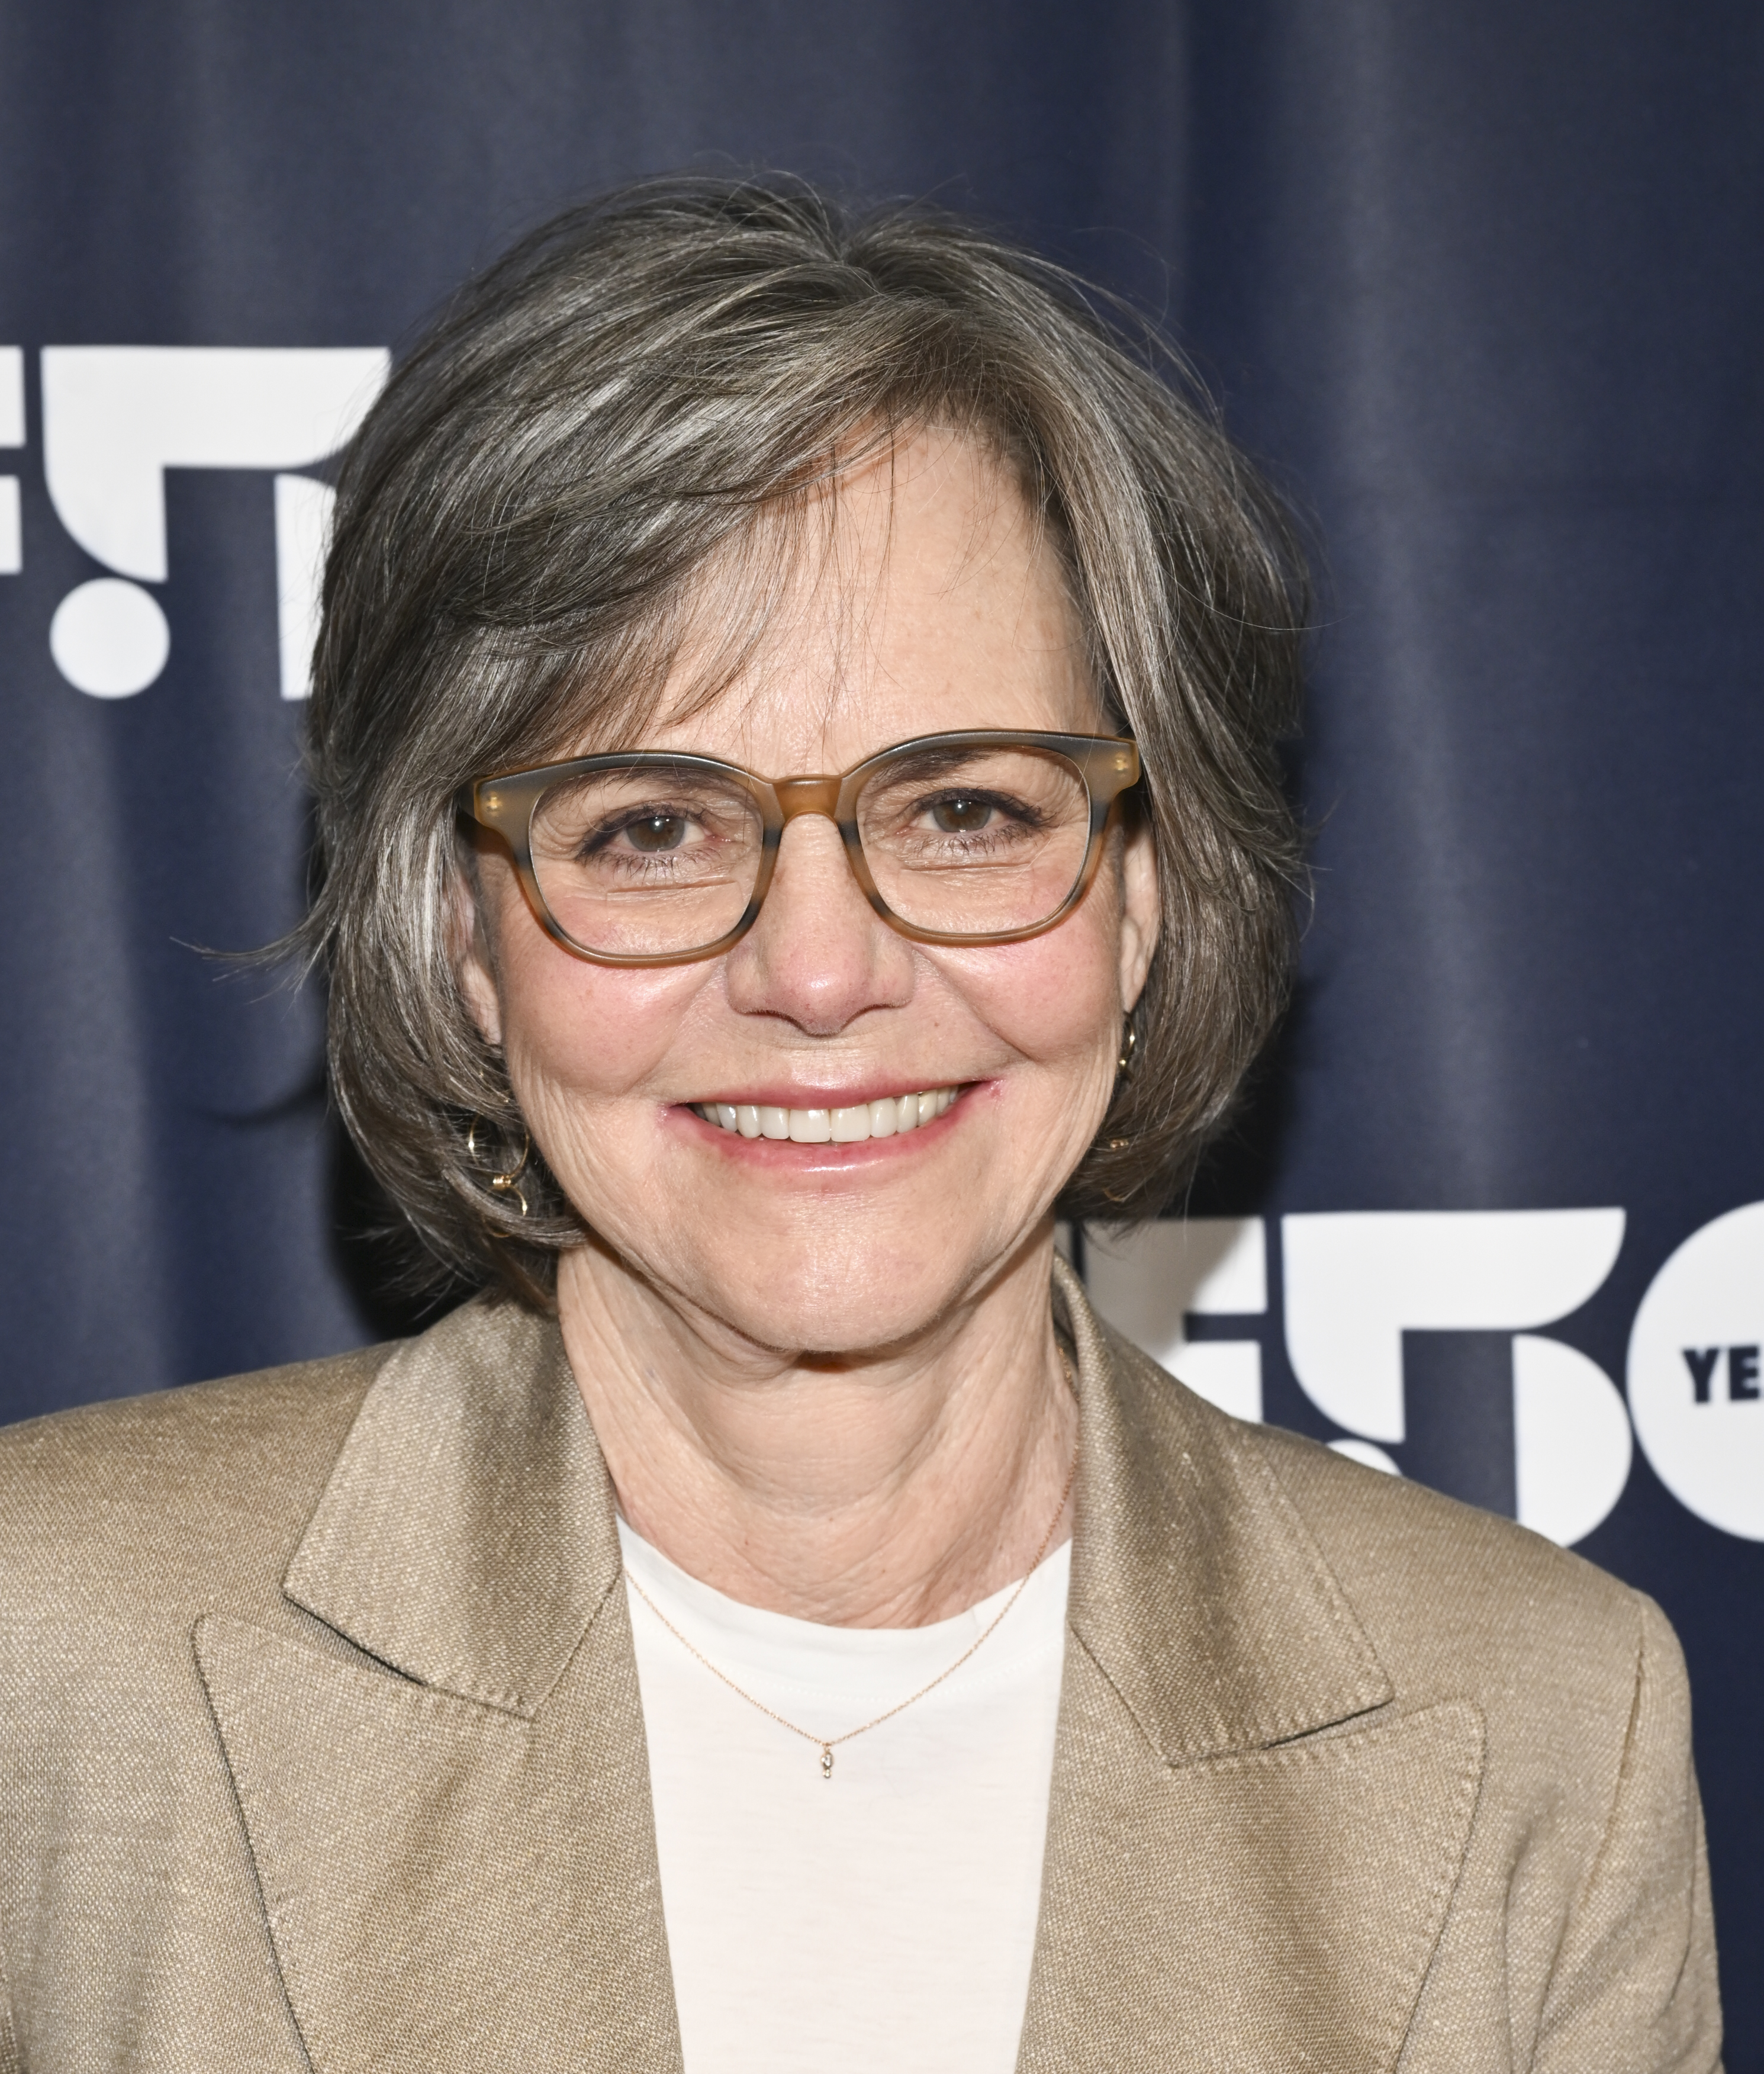 Sally Field during the 50th Anniversary screening series of "Norma Rae" in Los Angeles, California on June 29, 2023 | Source: Getty Images